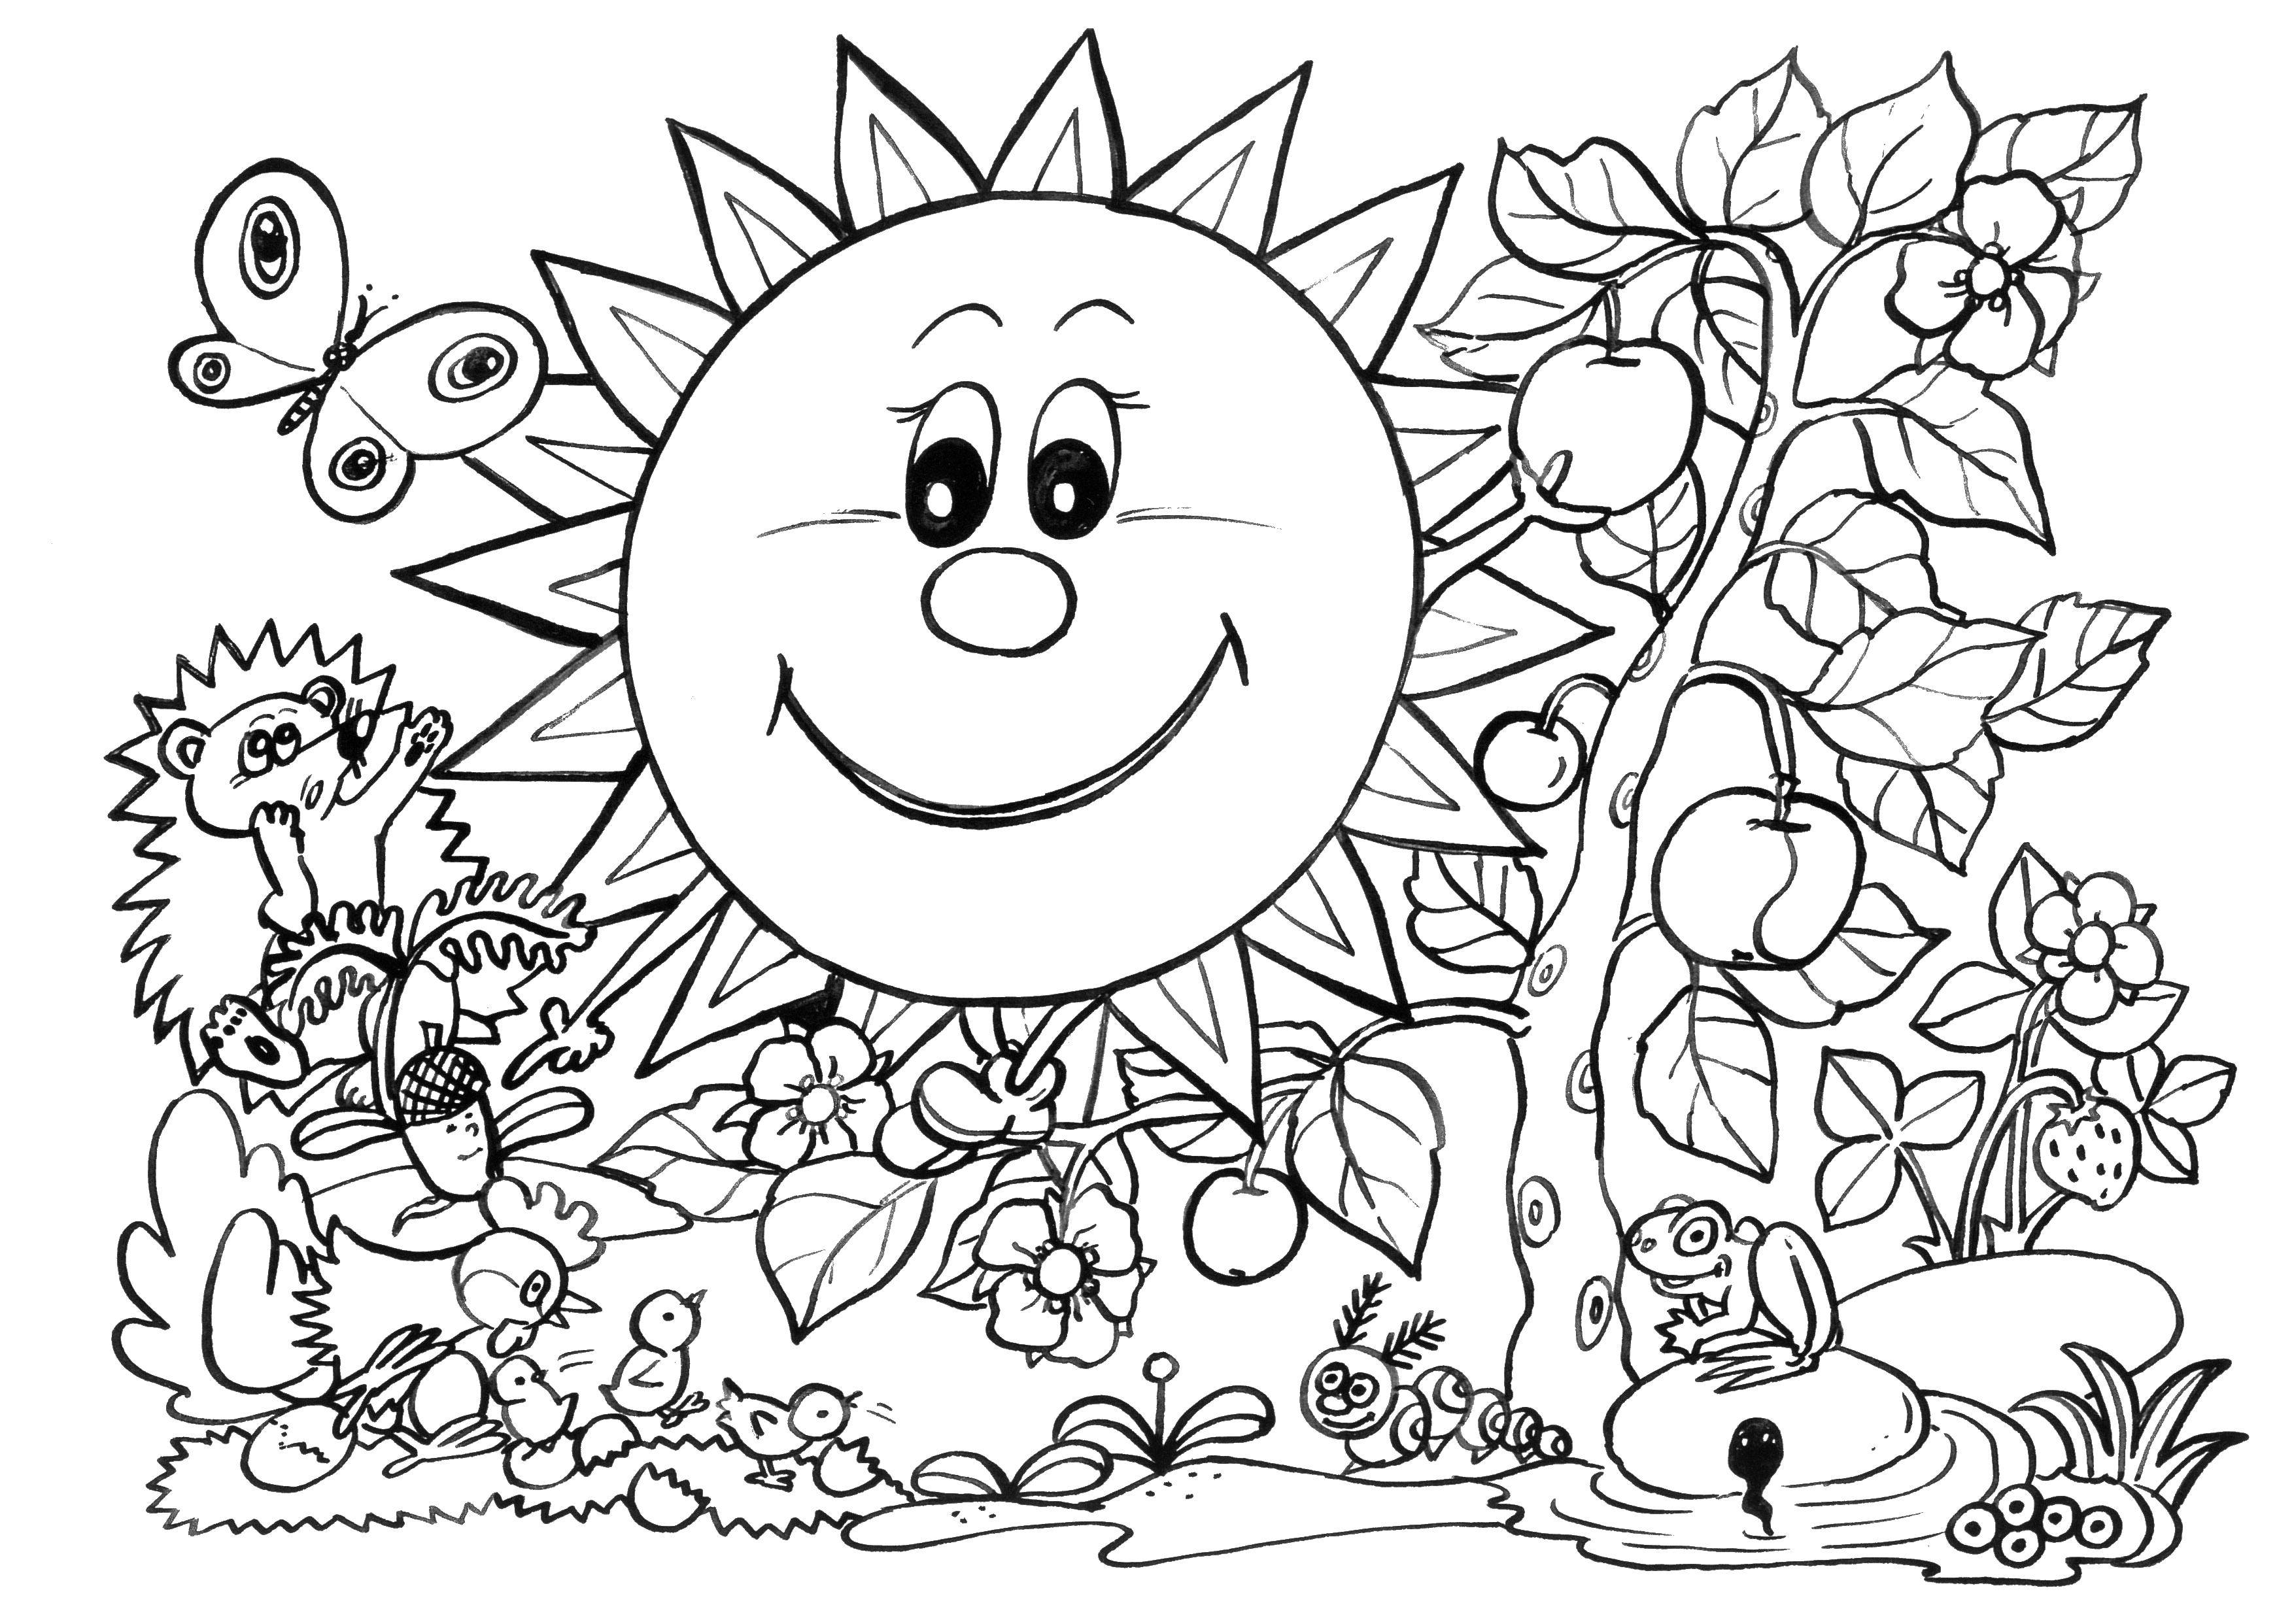 Coloring The sun and animals. Category Nature. Tags:  The sun, animals.